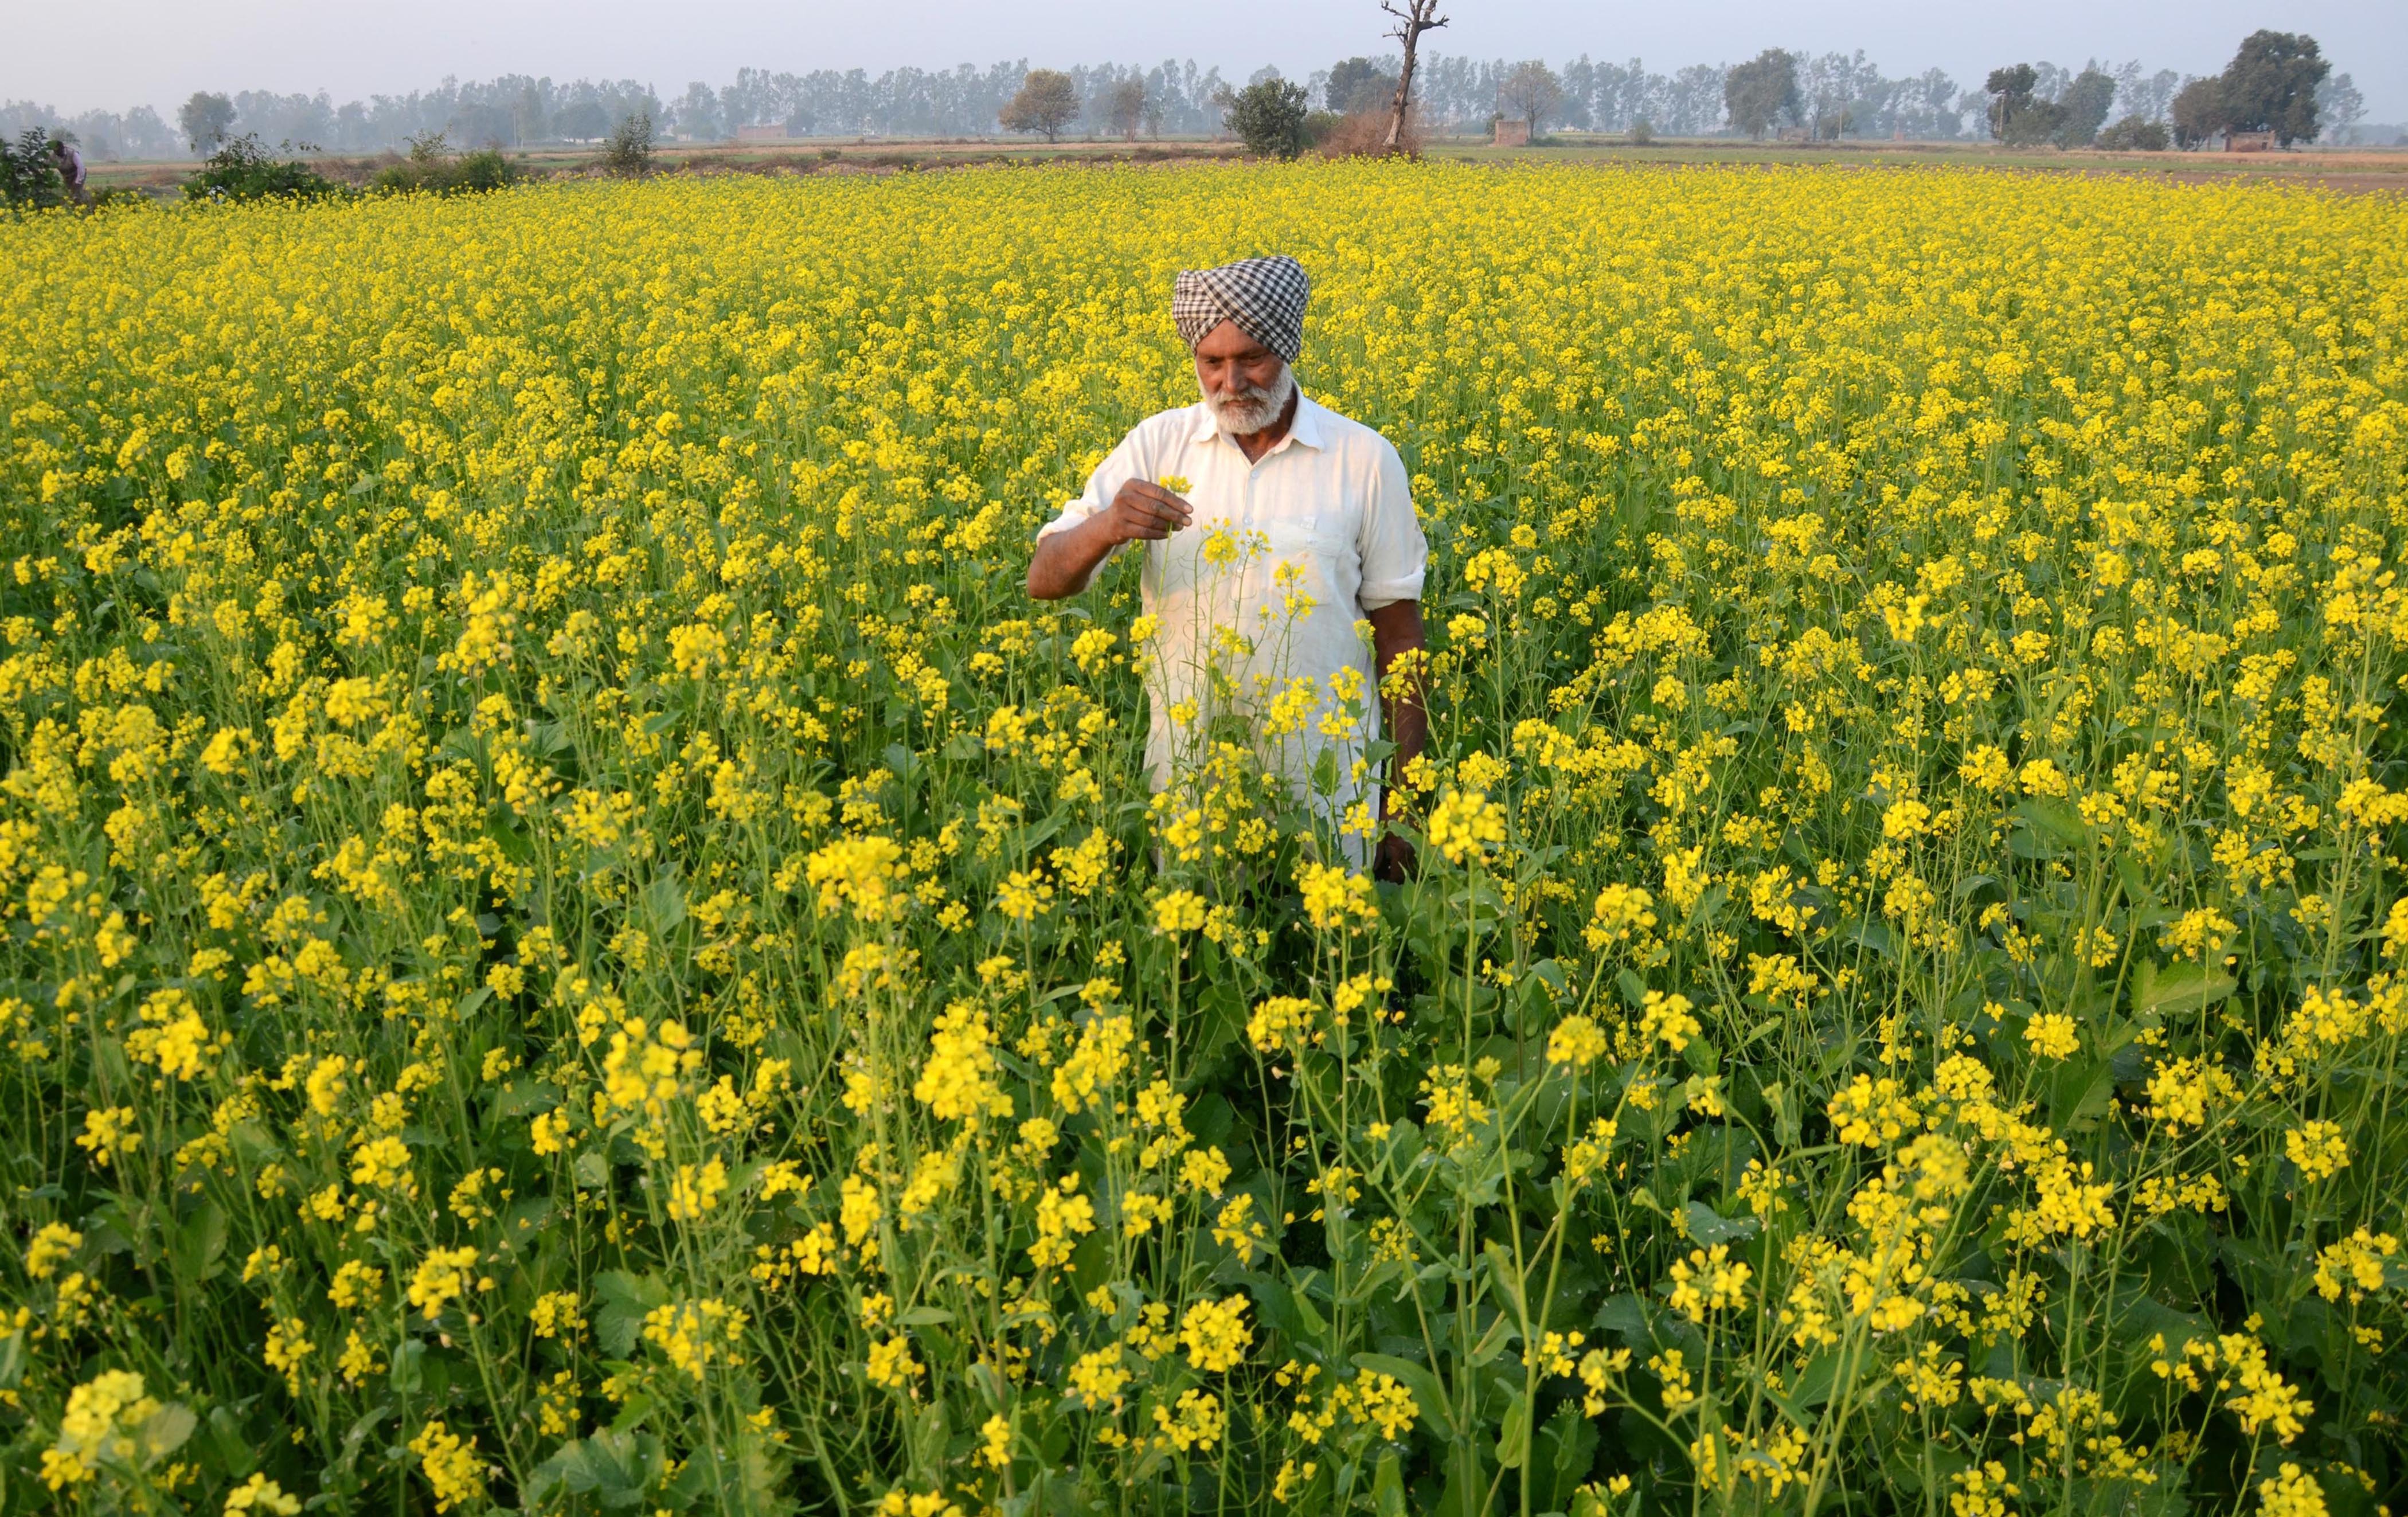 Better prices attract farmers towards mustard cultivation